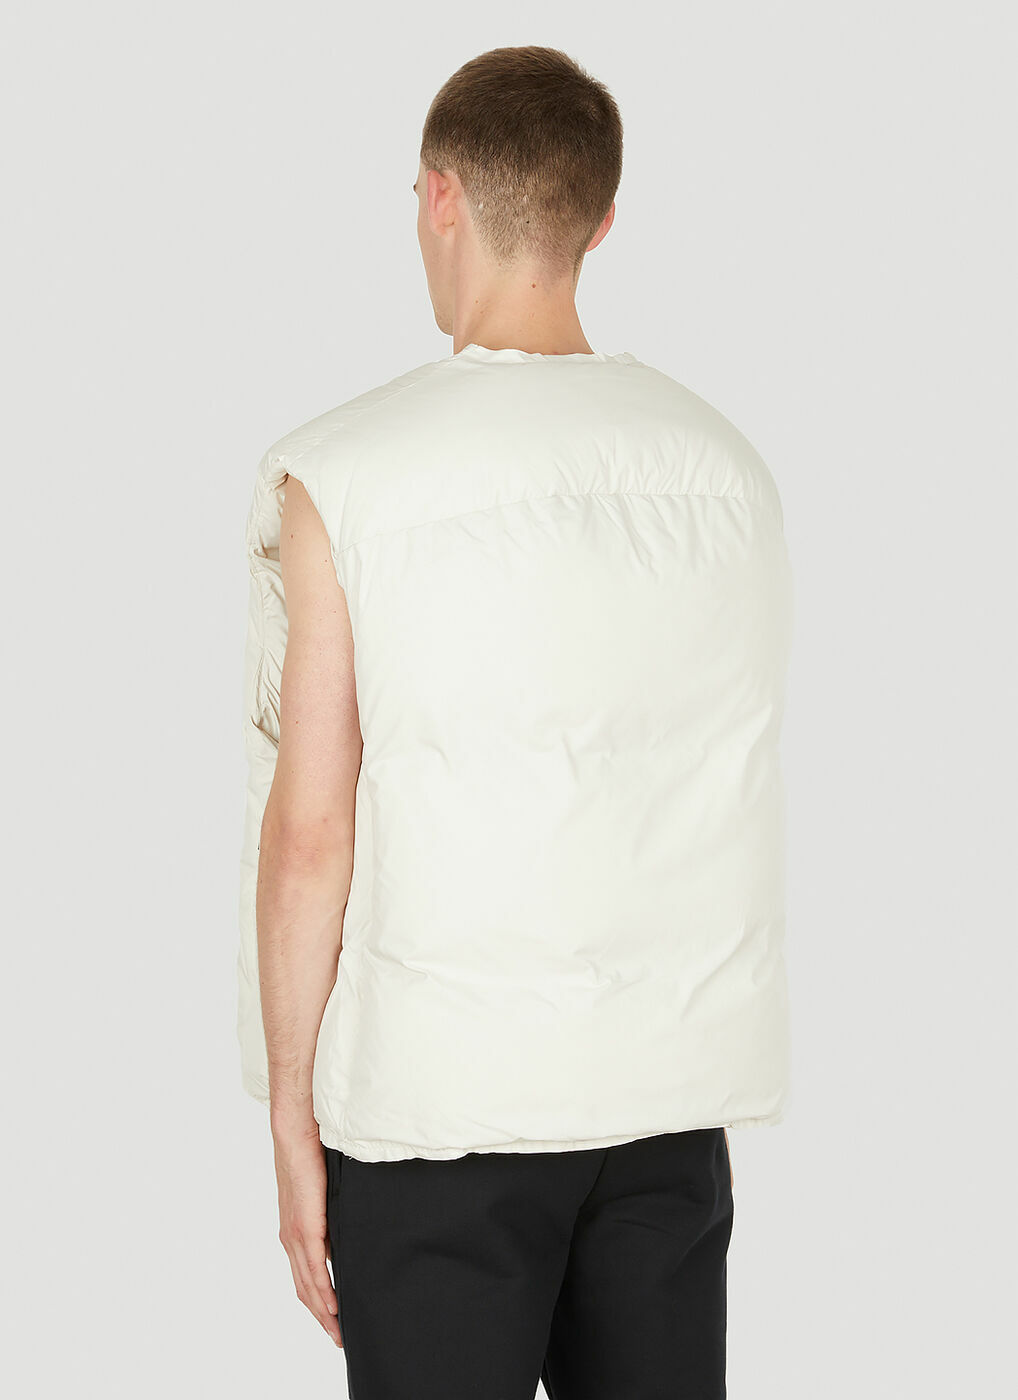 The Ultimate Sleeveless Puffer Jacket in White